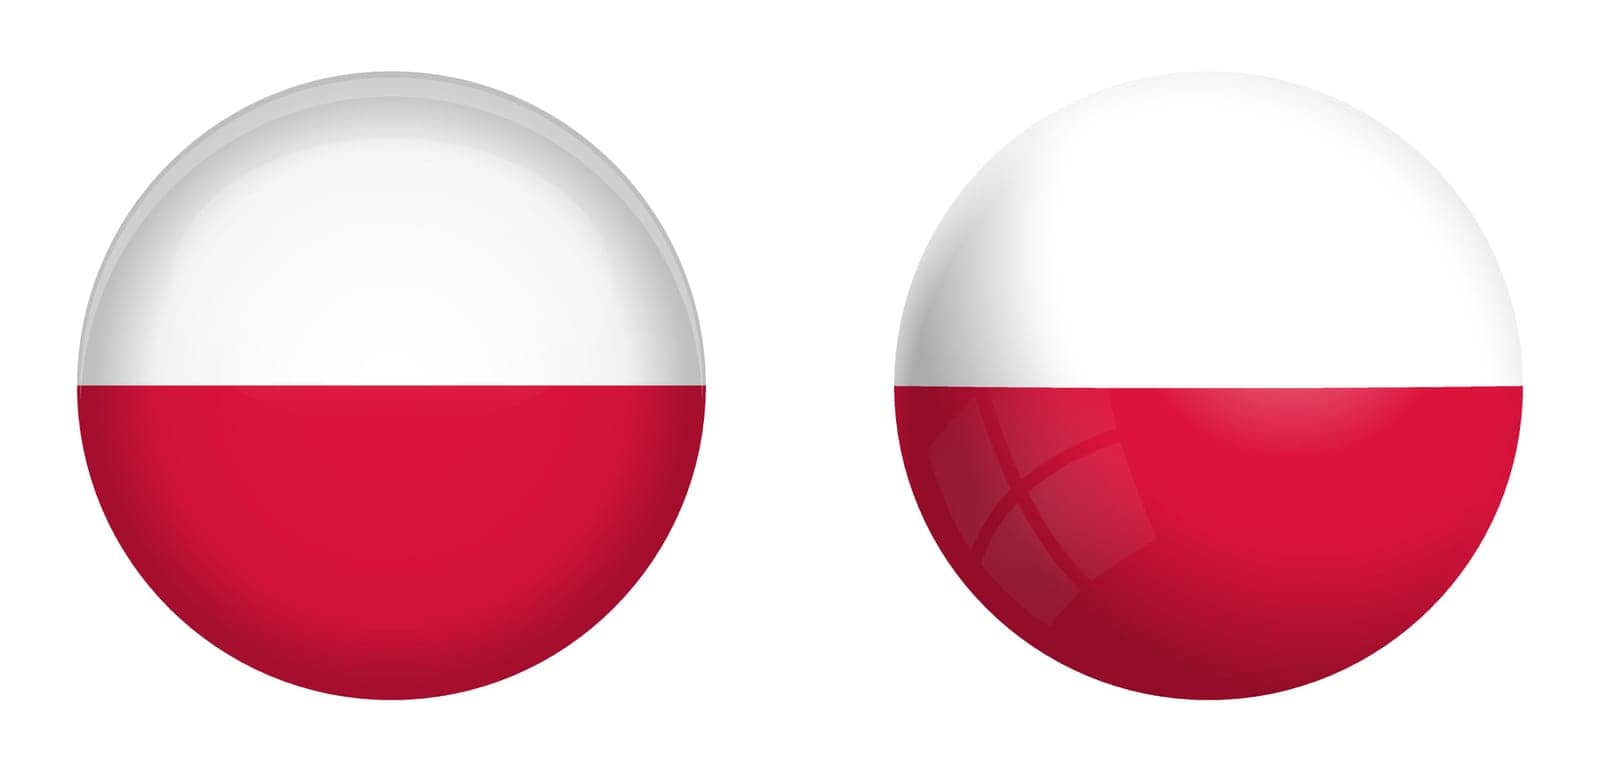 Poland flag under 3d dome button and on glossy sphere / ball.